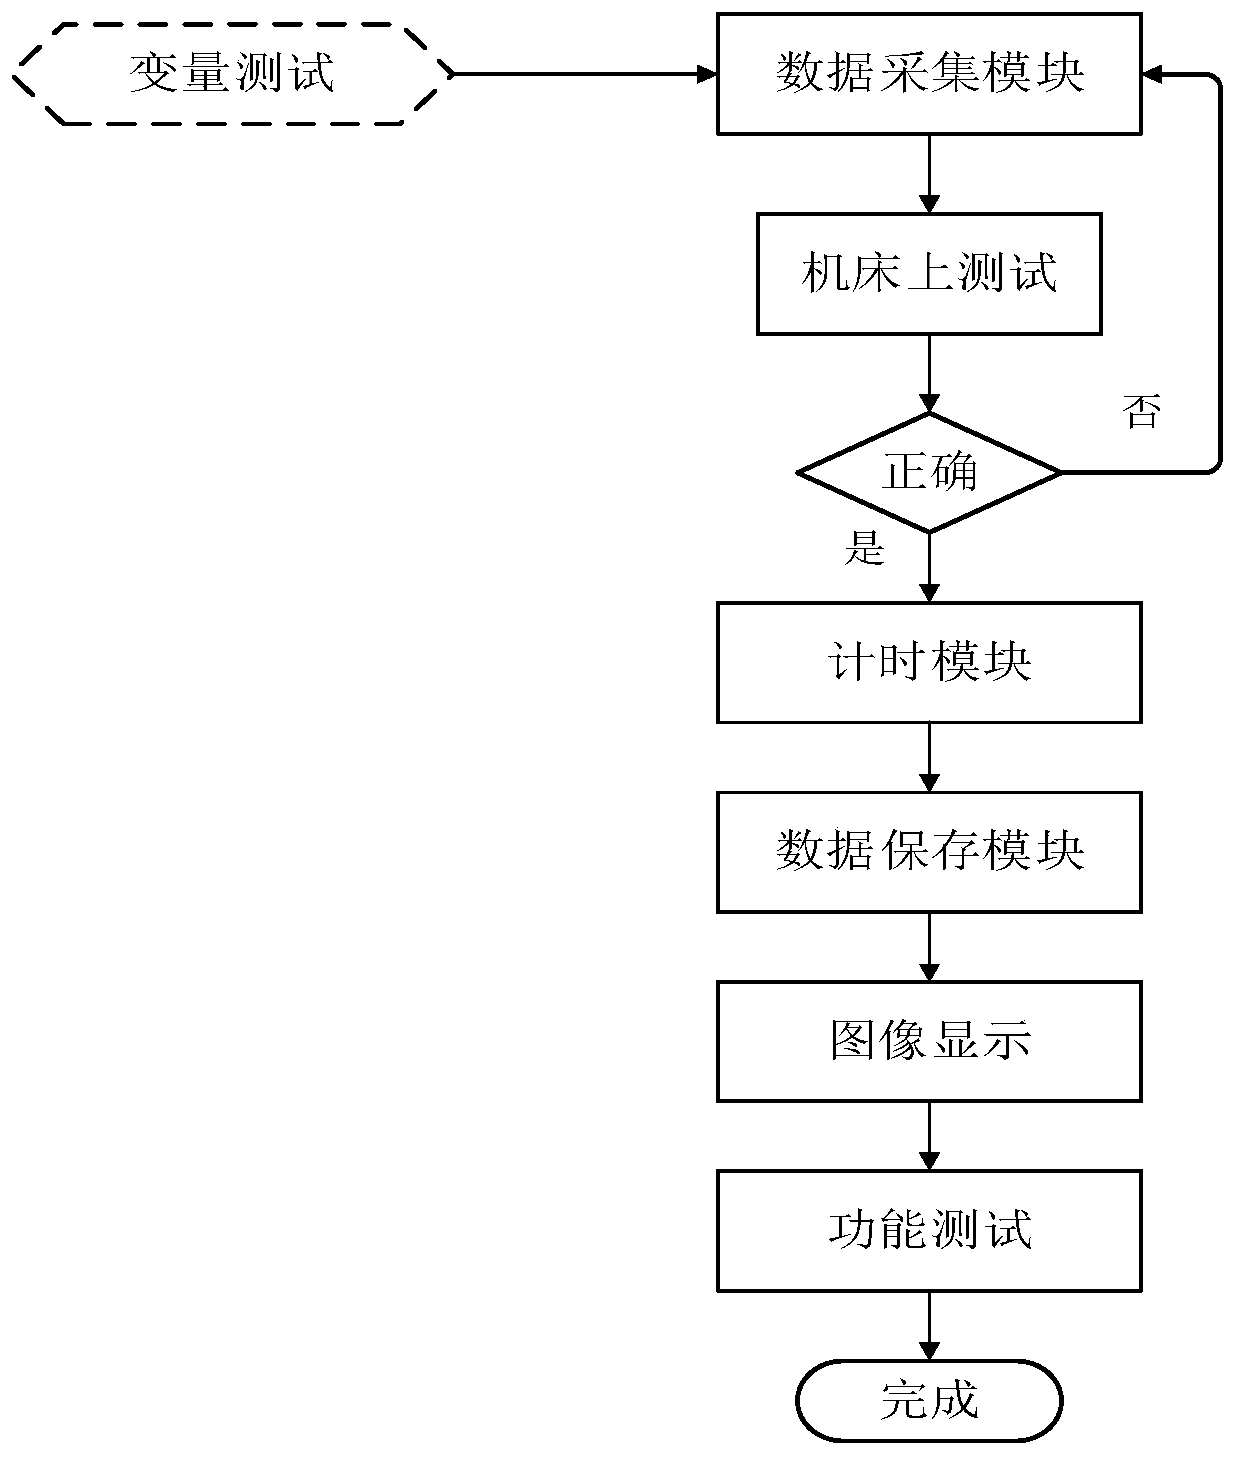 Numerical control system online monitoring method